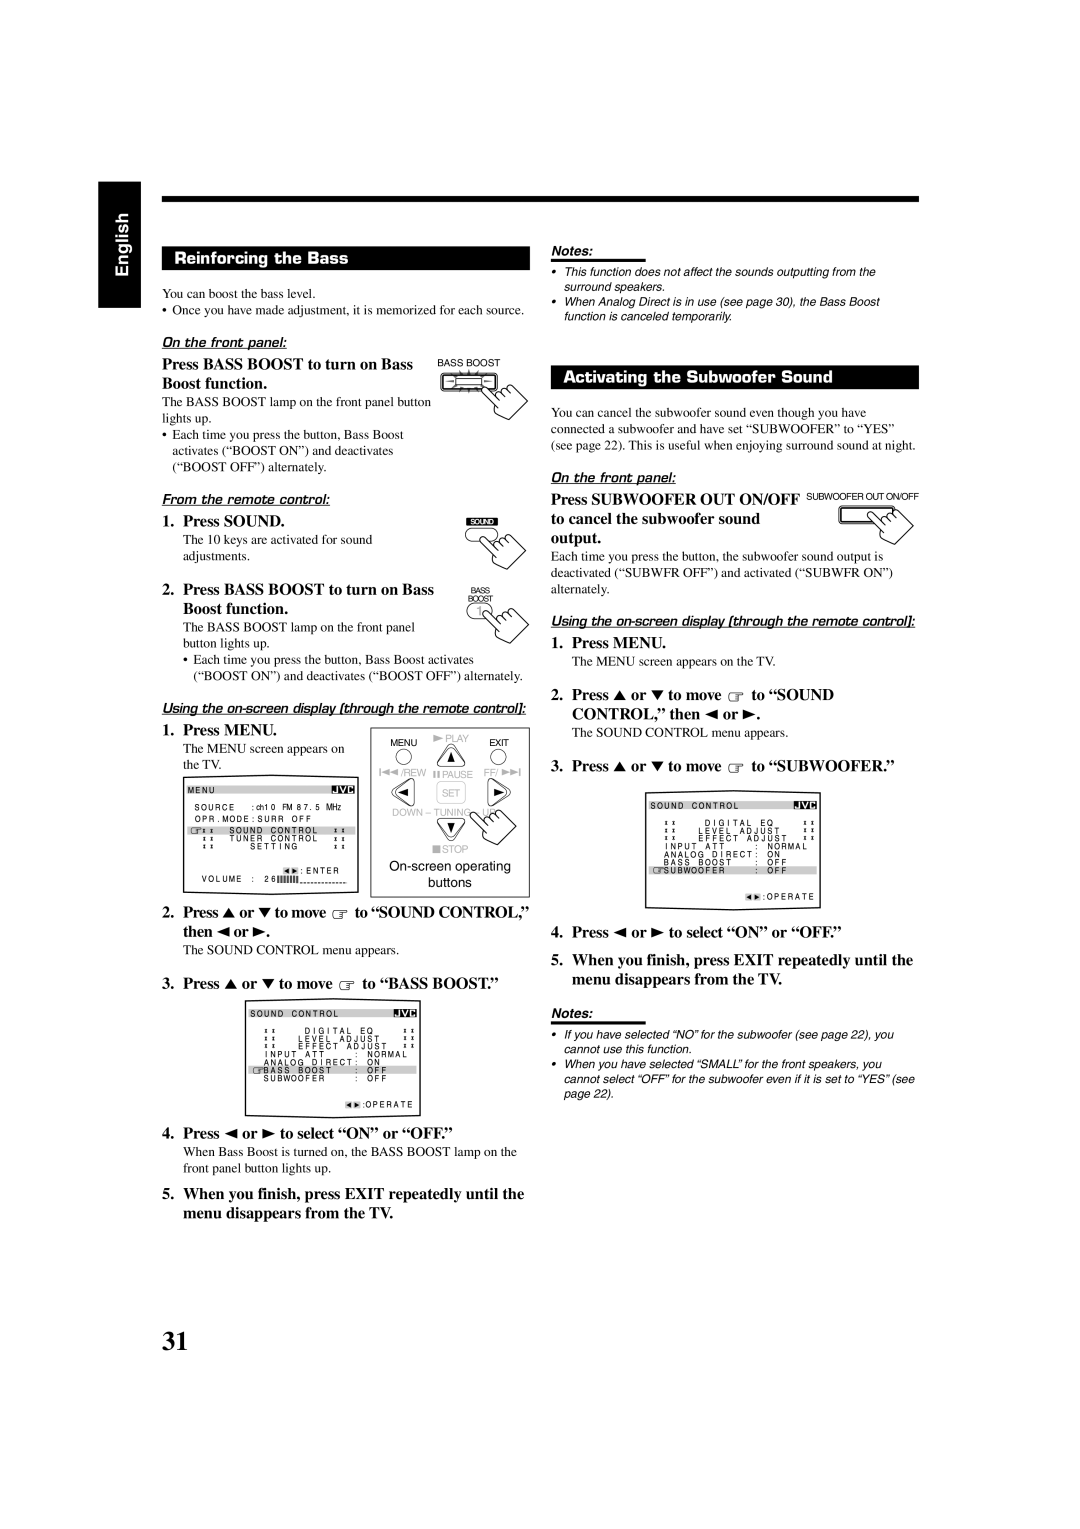 JVC RX-8020VBK manual English, Reinforcing the Bass, Activating the Subwoofer Sound 